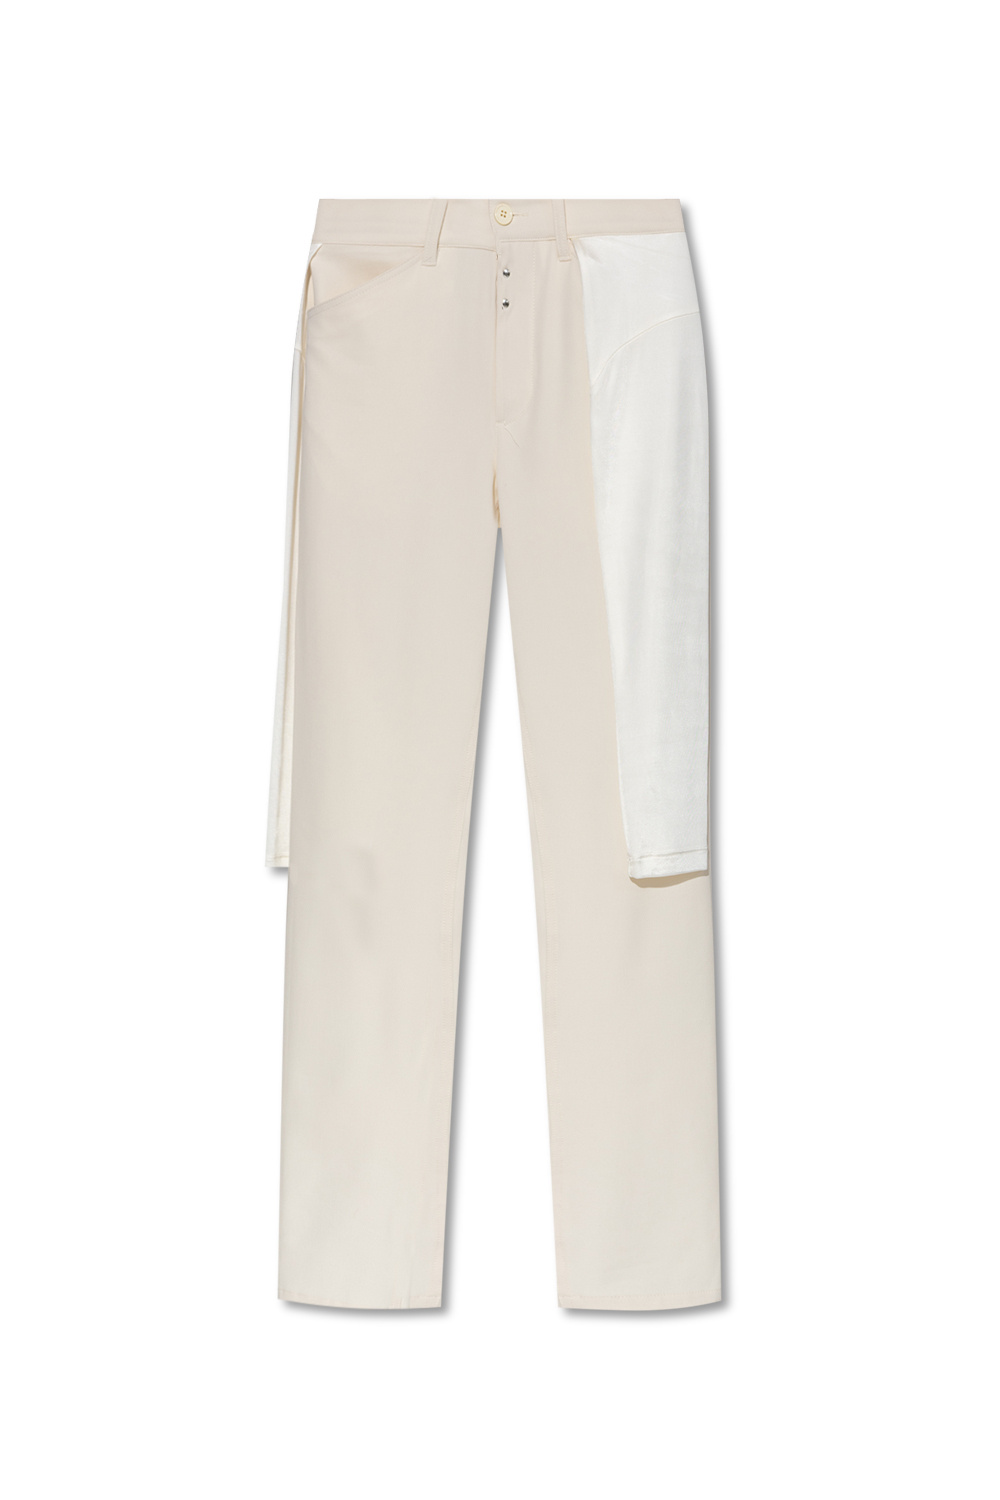 MM6 Maison Margiela Trousers with inserts